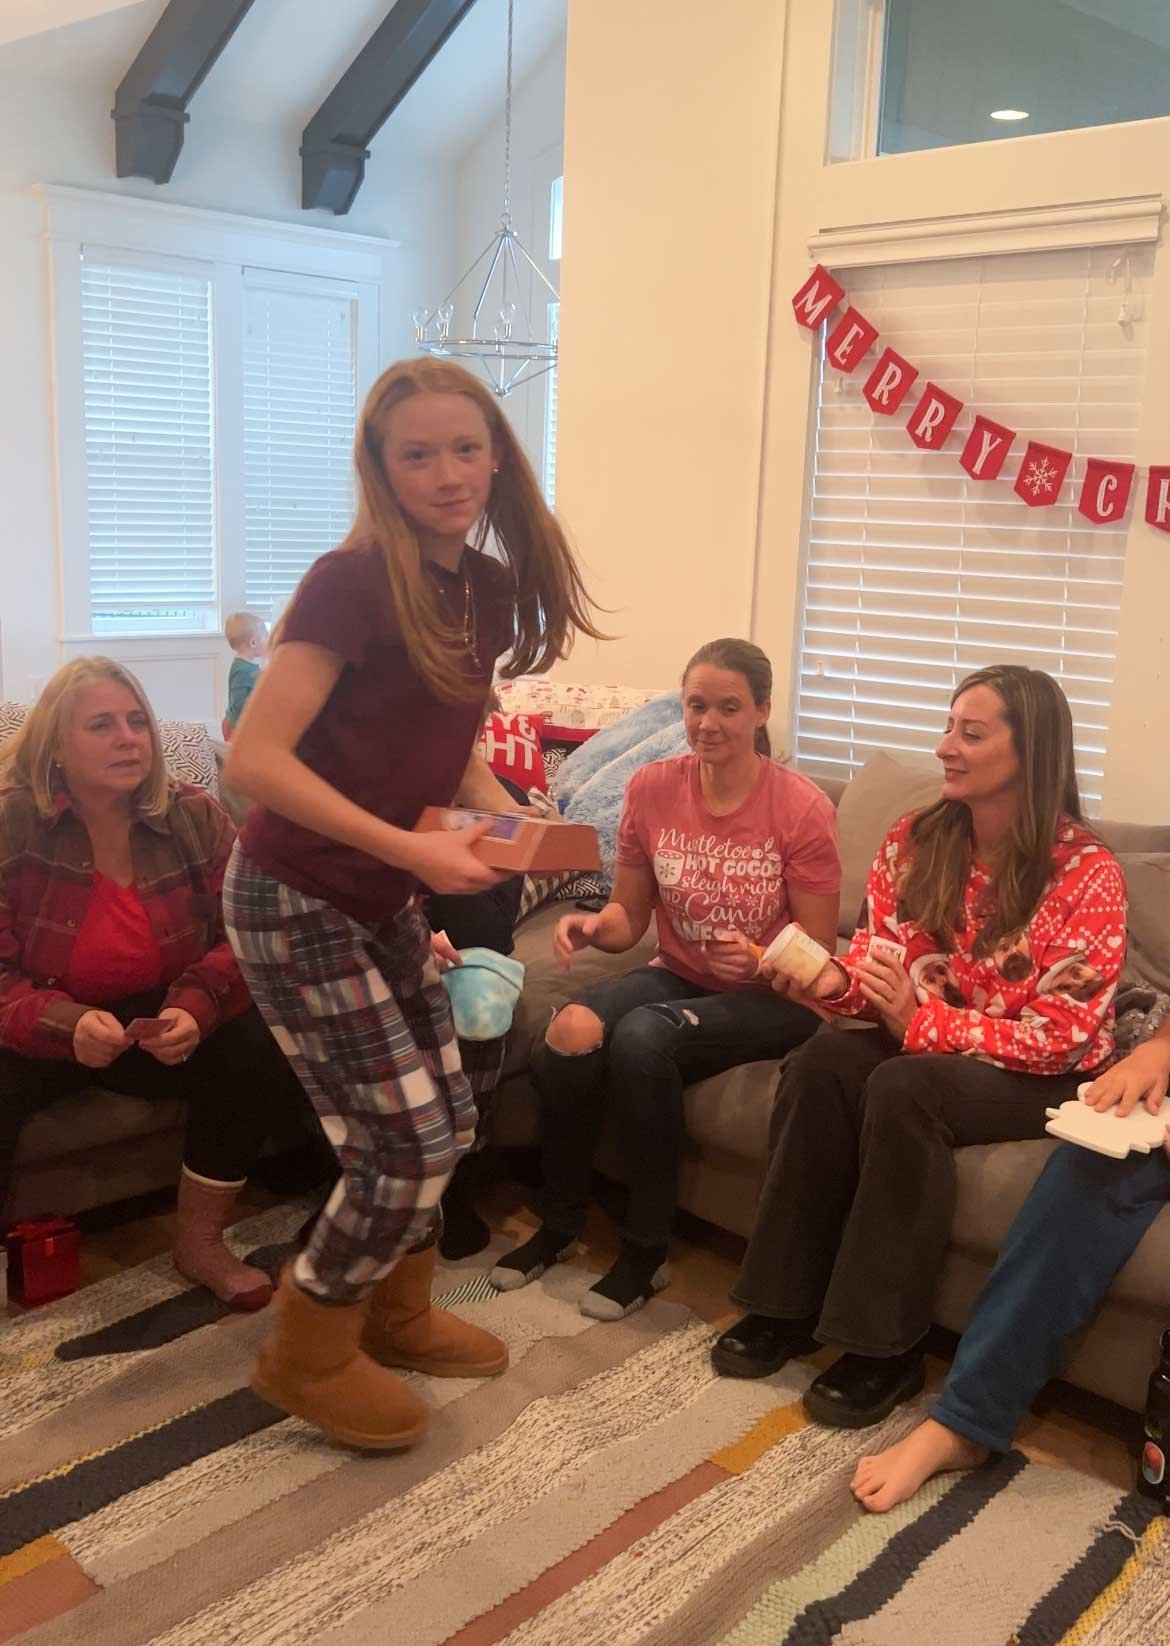 girl stealing a gift from her mom in a gift exchange